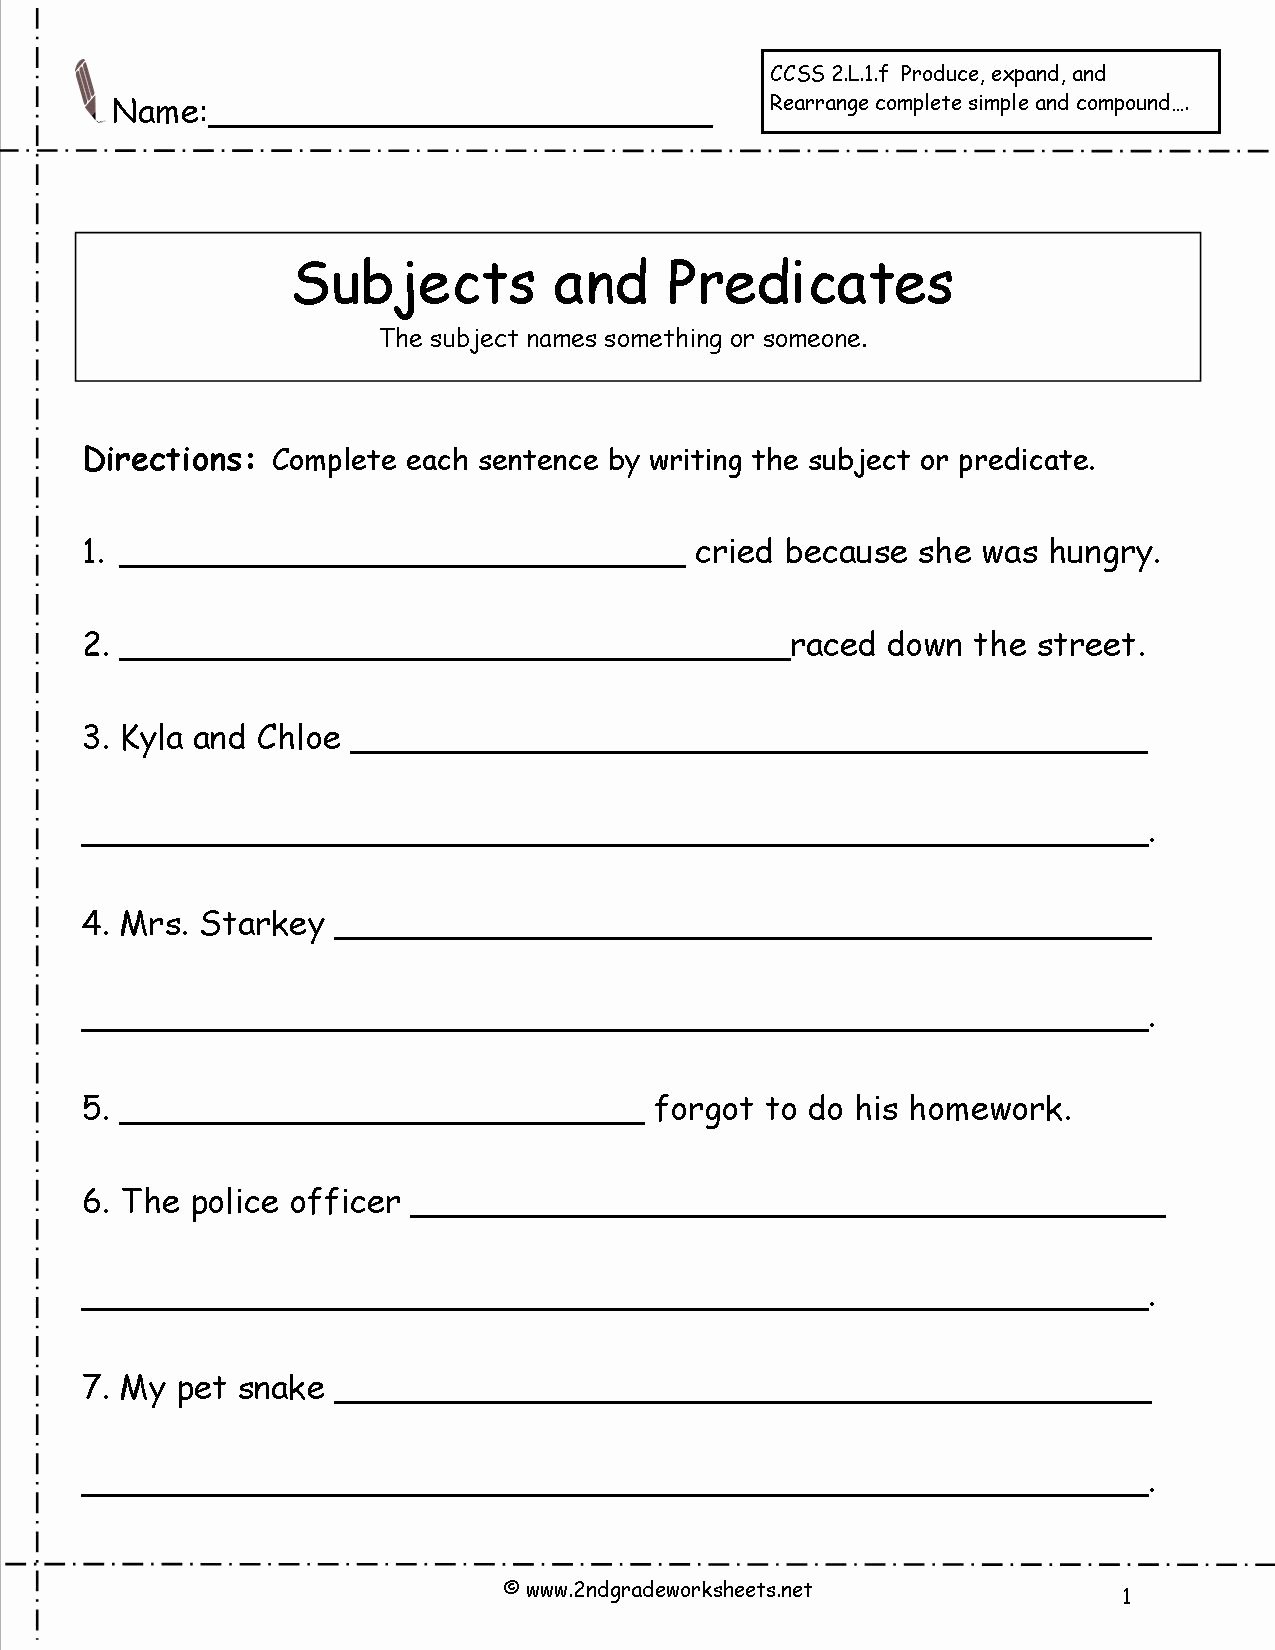 Complete Subject and Predicate Worksheet Awesome Second Grade Sentences Worksheets Ccss 2 L 1 F Worksheets